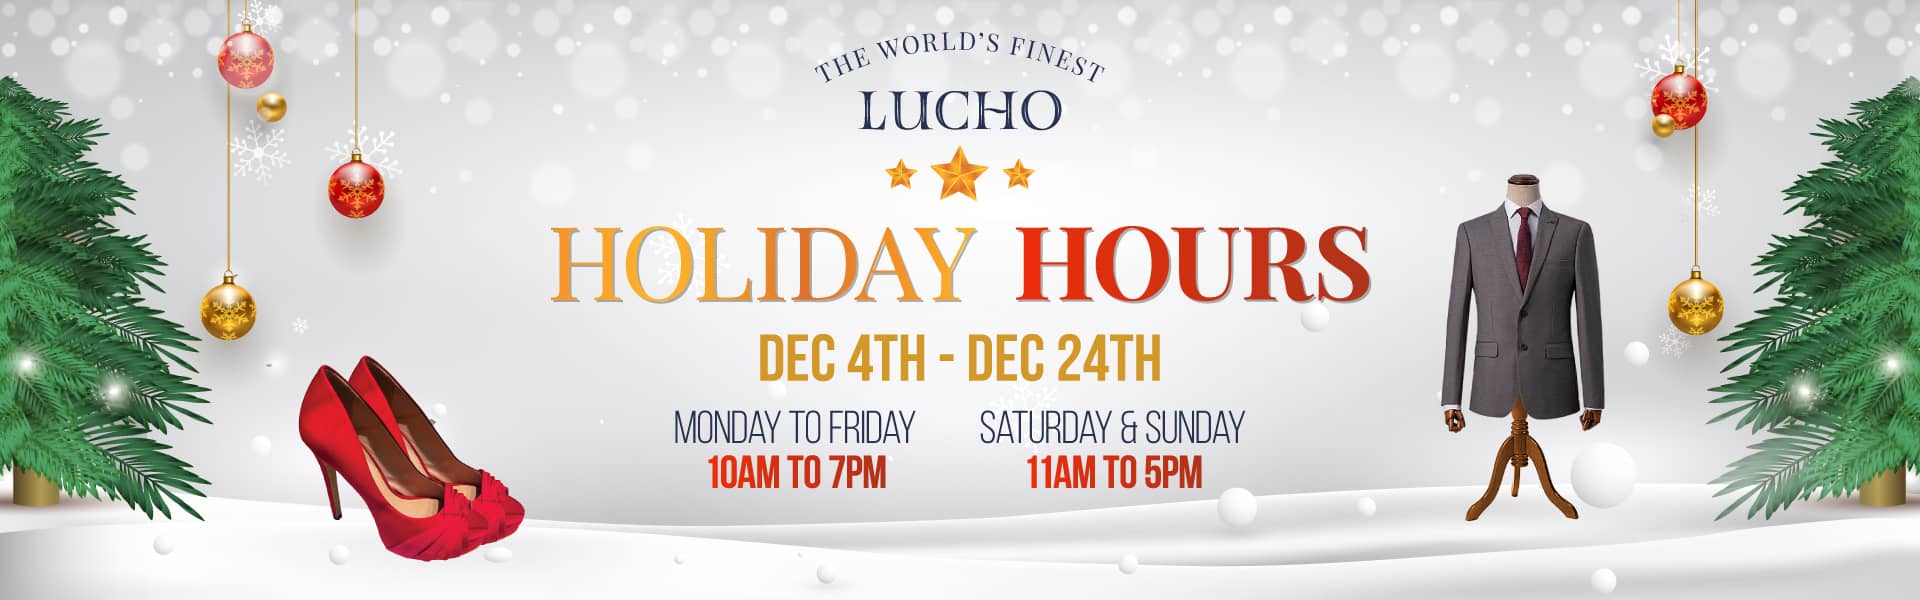 Lucho-Holiday-Hour-Web-Banner-1920x600